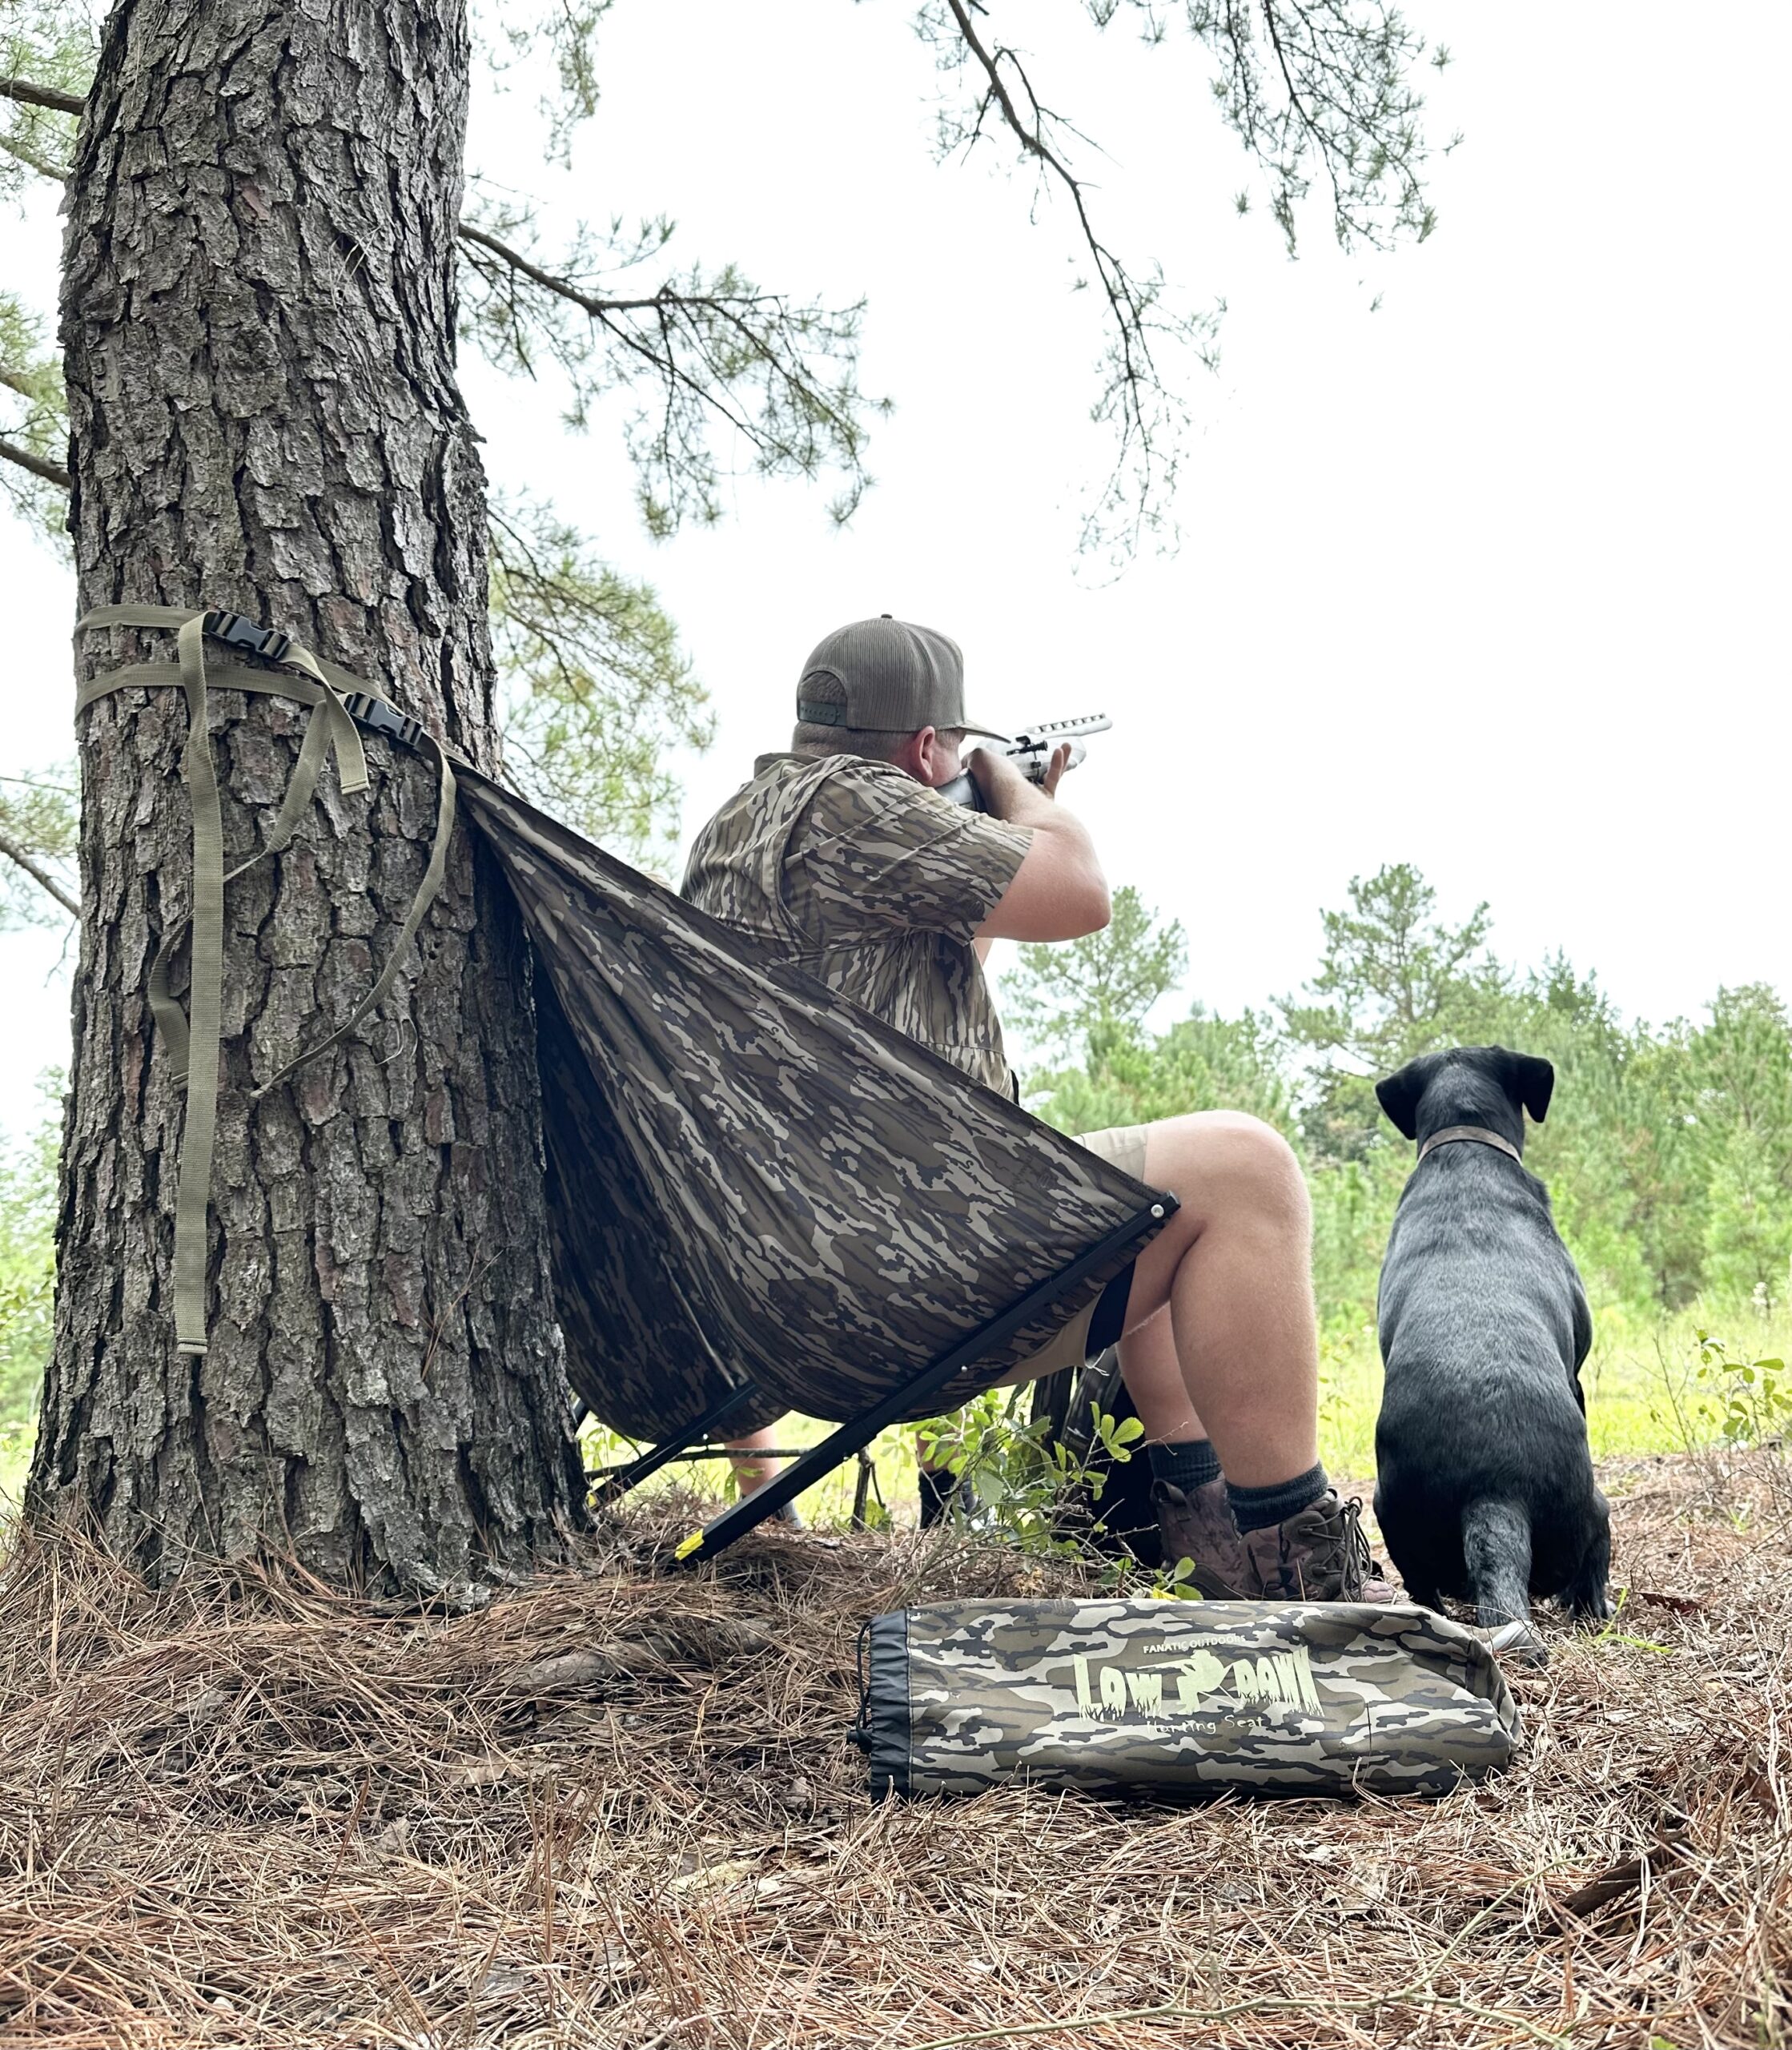 Ground Seats for Turkey Hunting  Which Fits Your Hunting Style